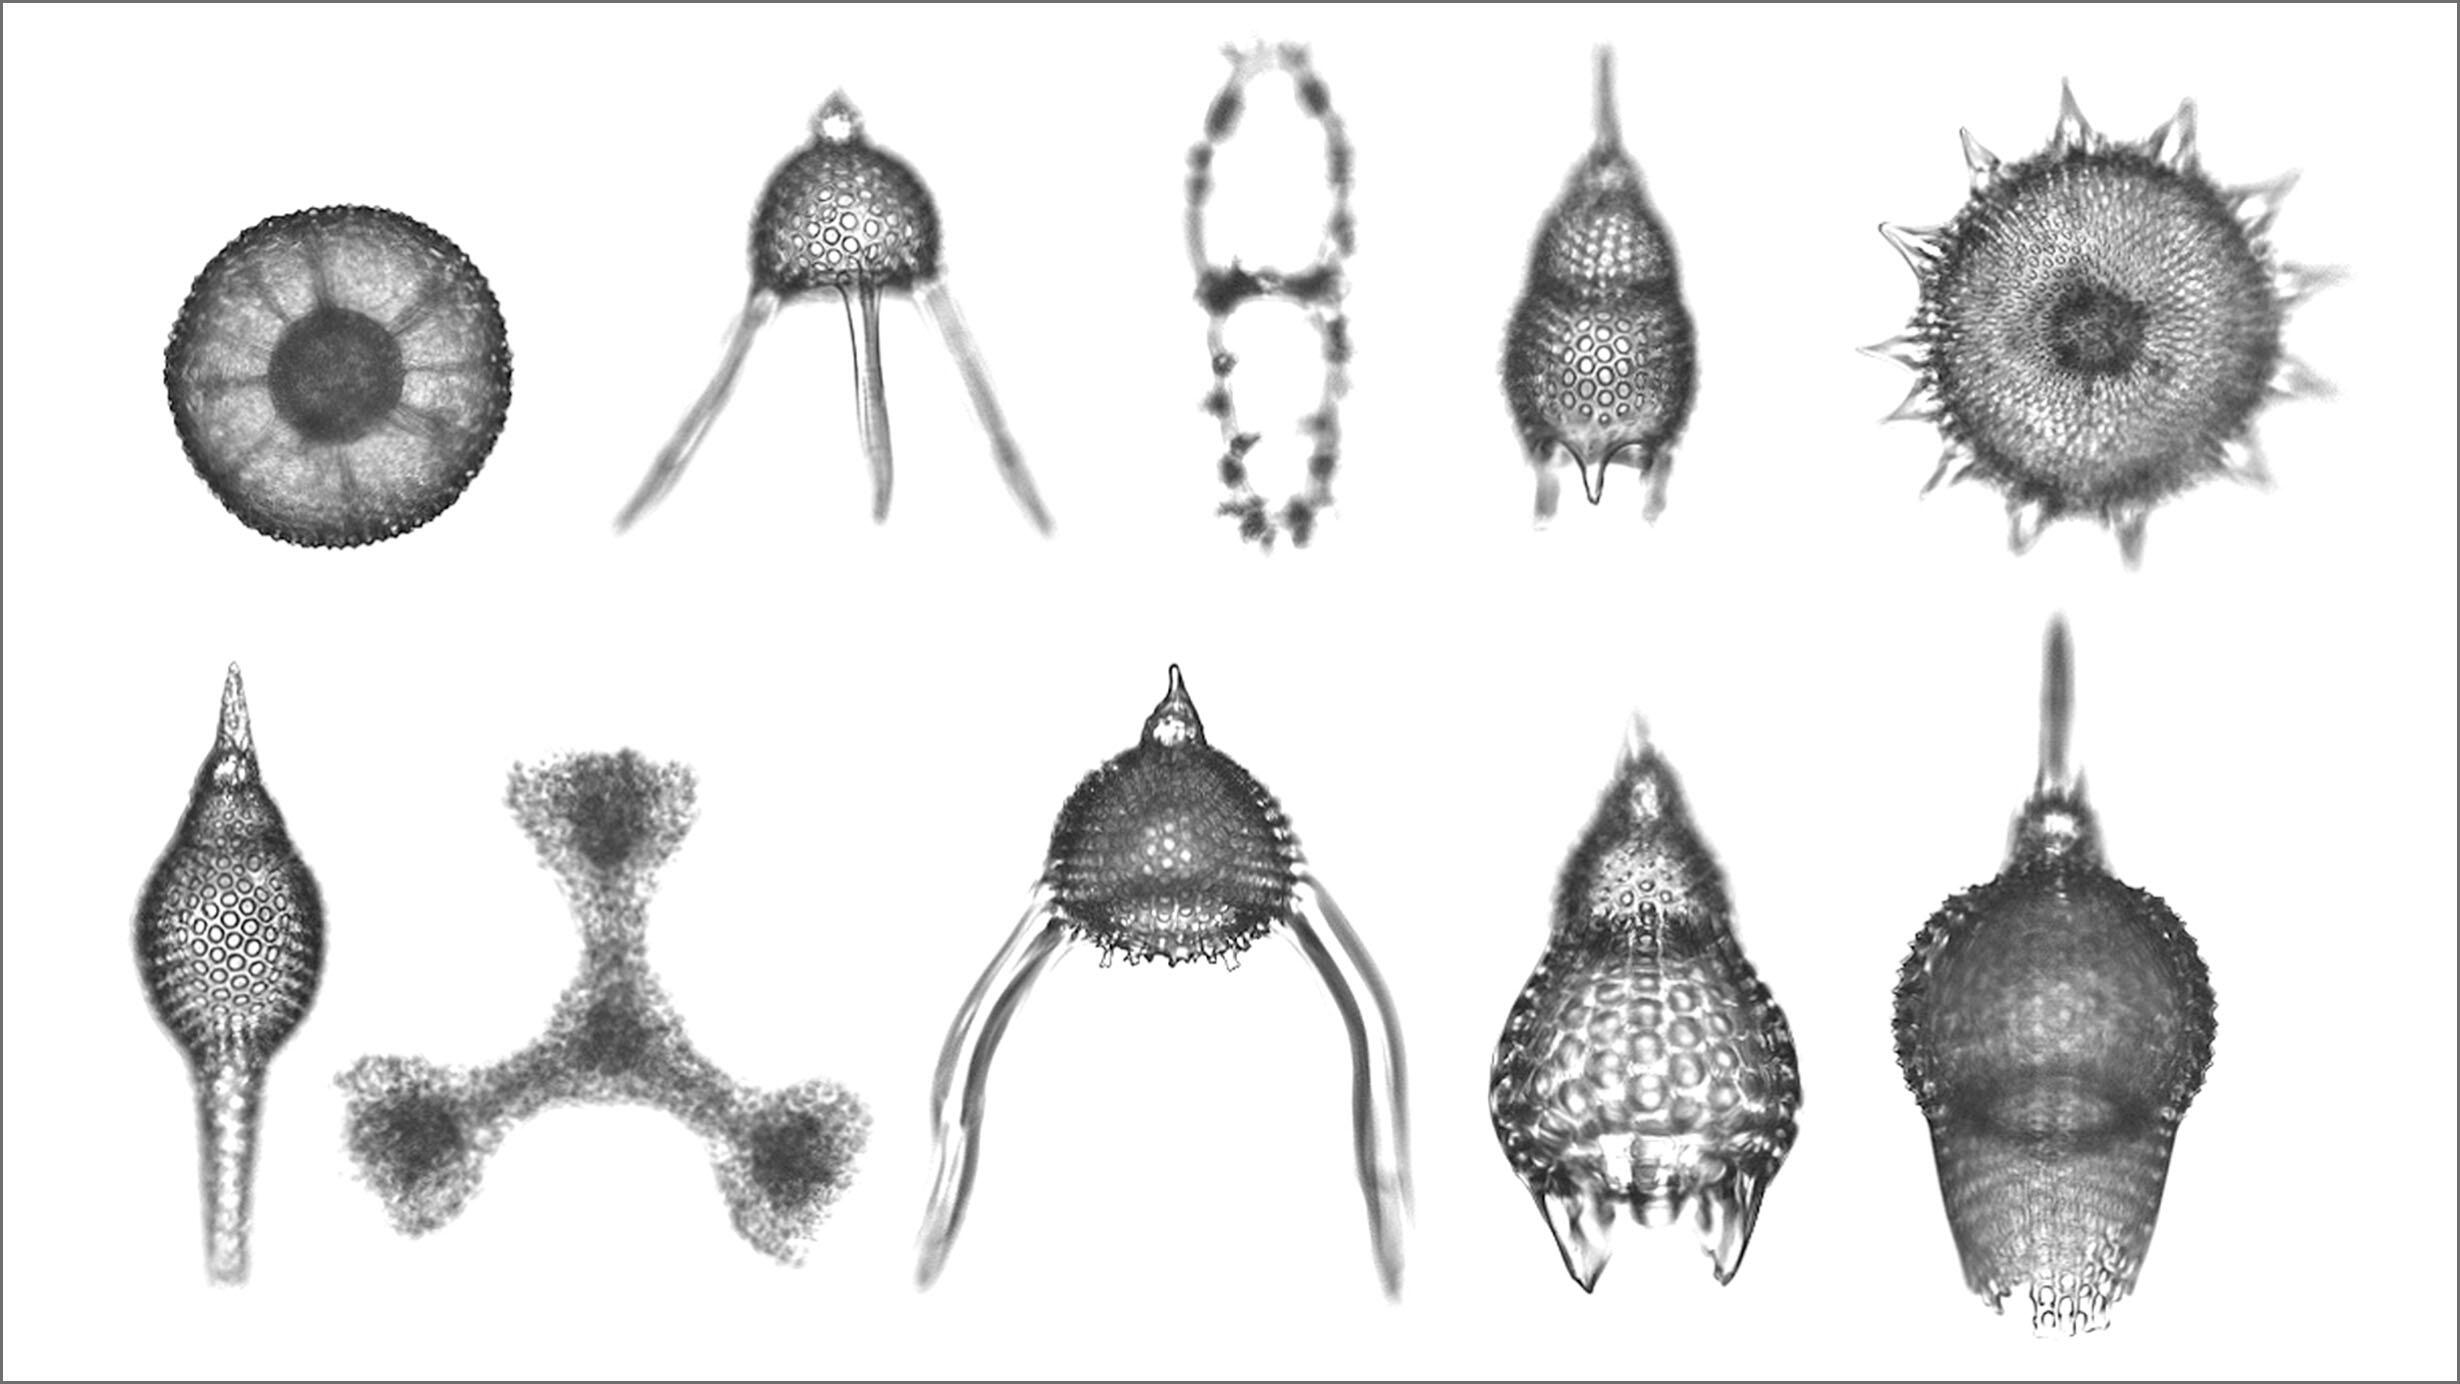 A photomicrograph showing 10 species of radiolaria. 